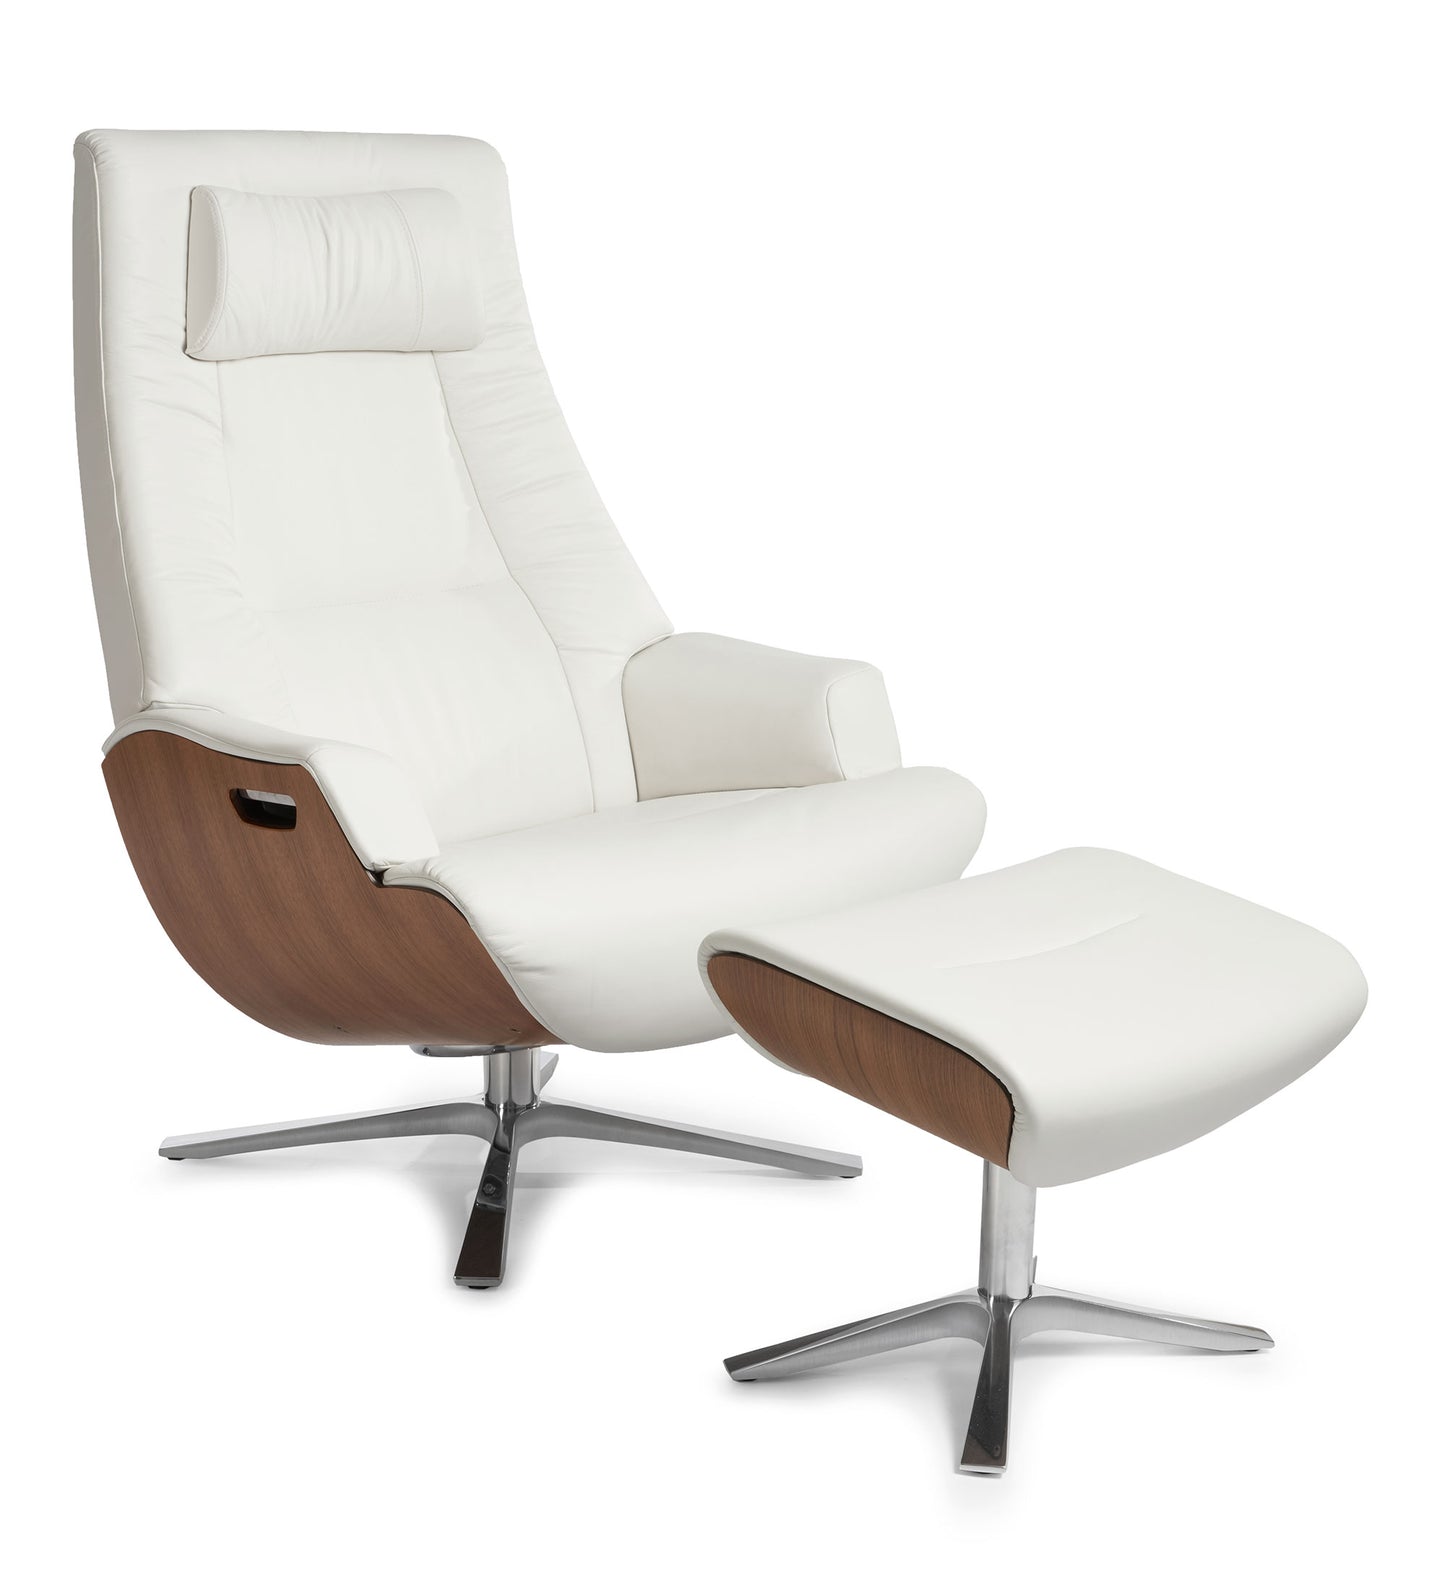 Conform Recliner Partner with Footstool